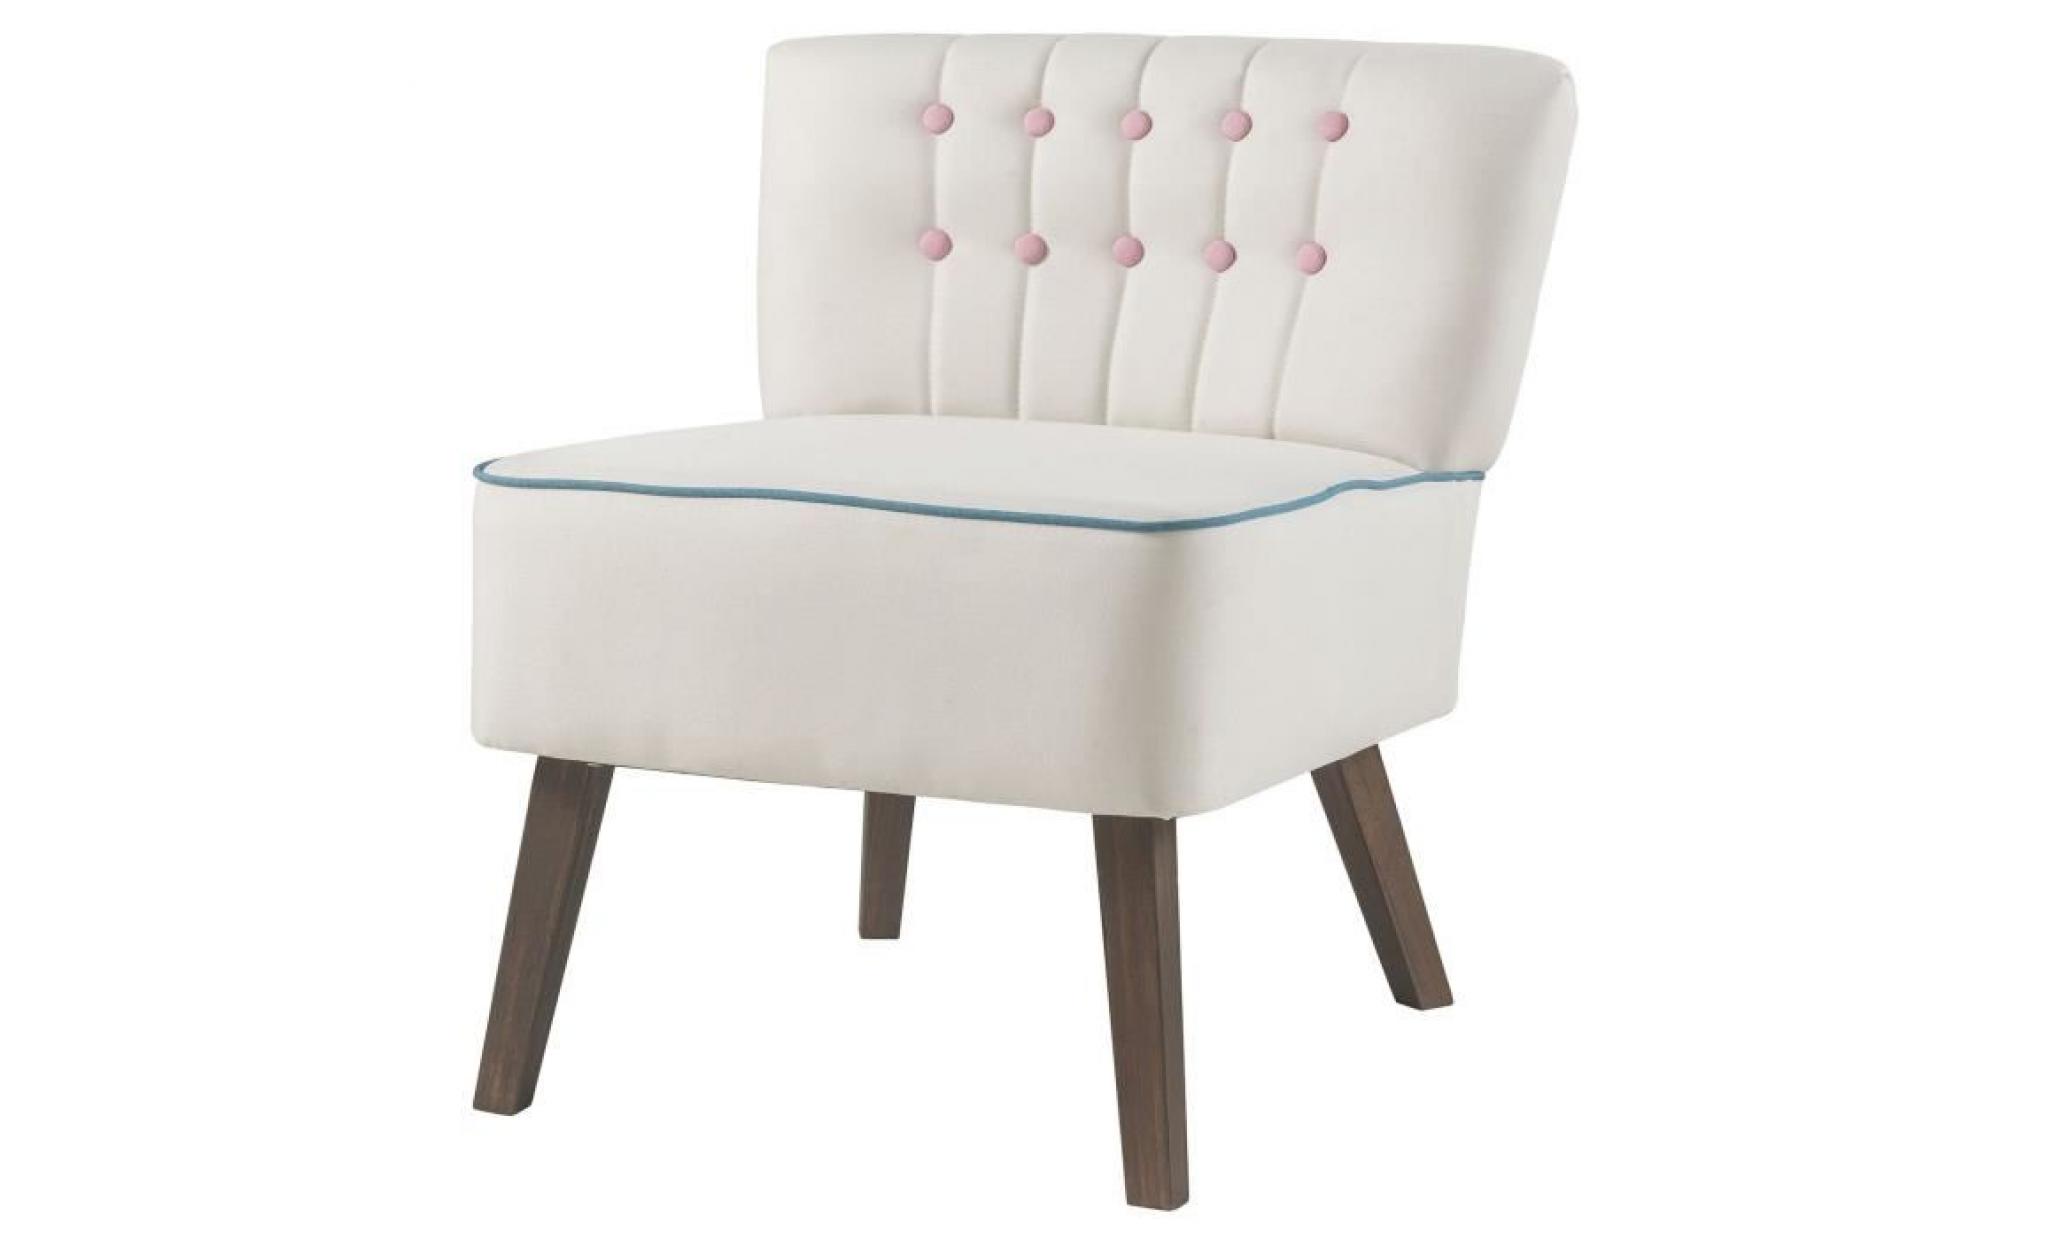 stanford fauteuil crapaud   tissu blanc boutons rose   scandinave   l 60 x p 44 cm